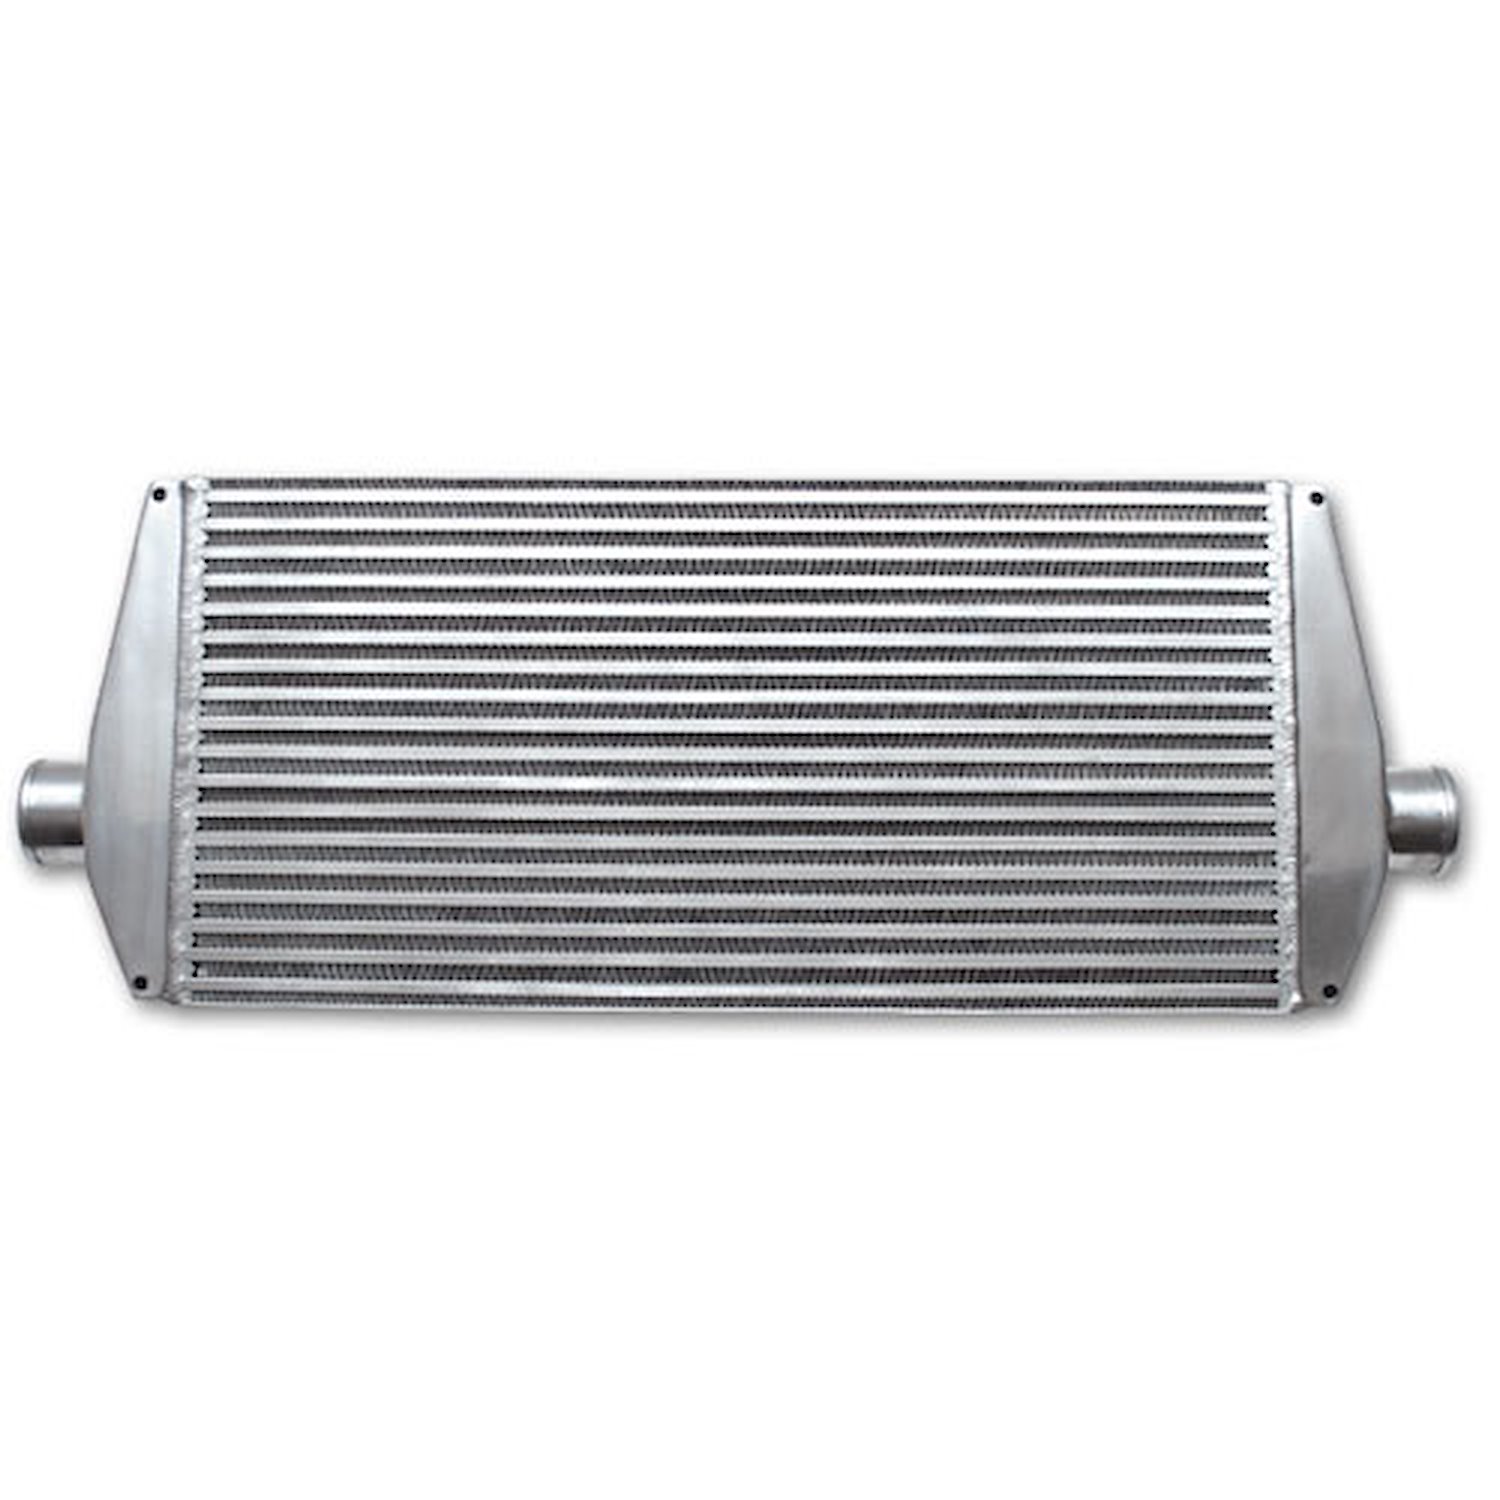 Air-to-Air Intercooler with End Tanks HP Rating: 350